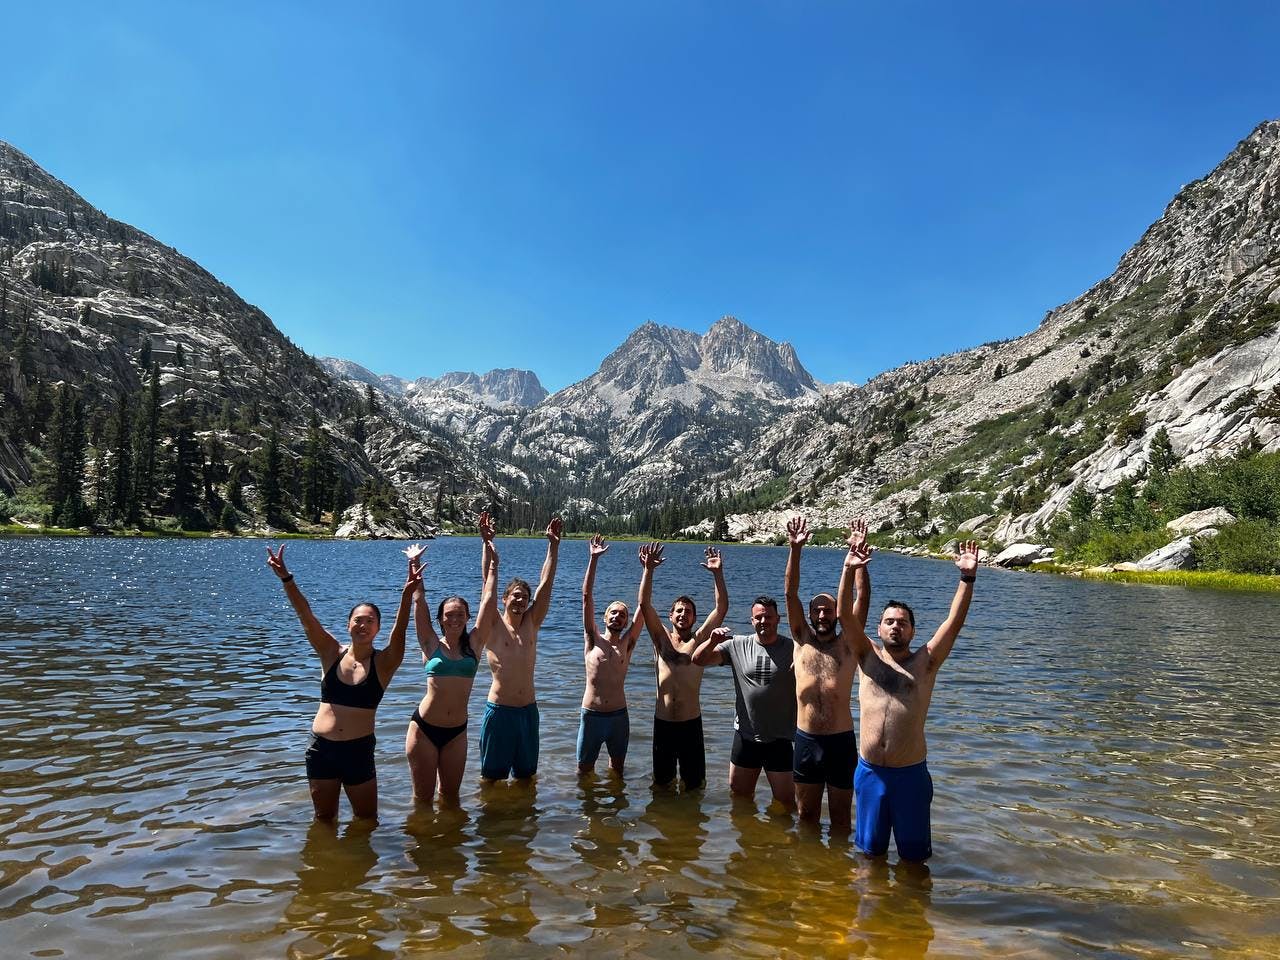 one of the many beautiful alpine lakes we visited (and jumped in)